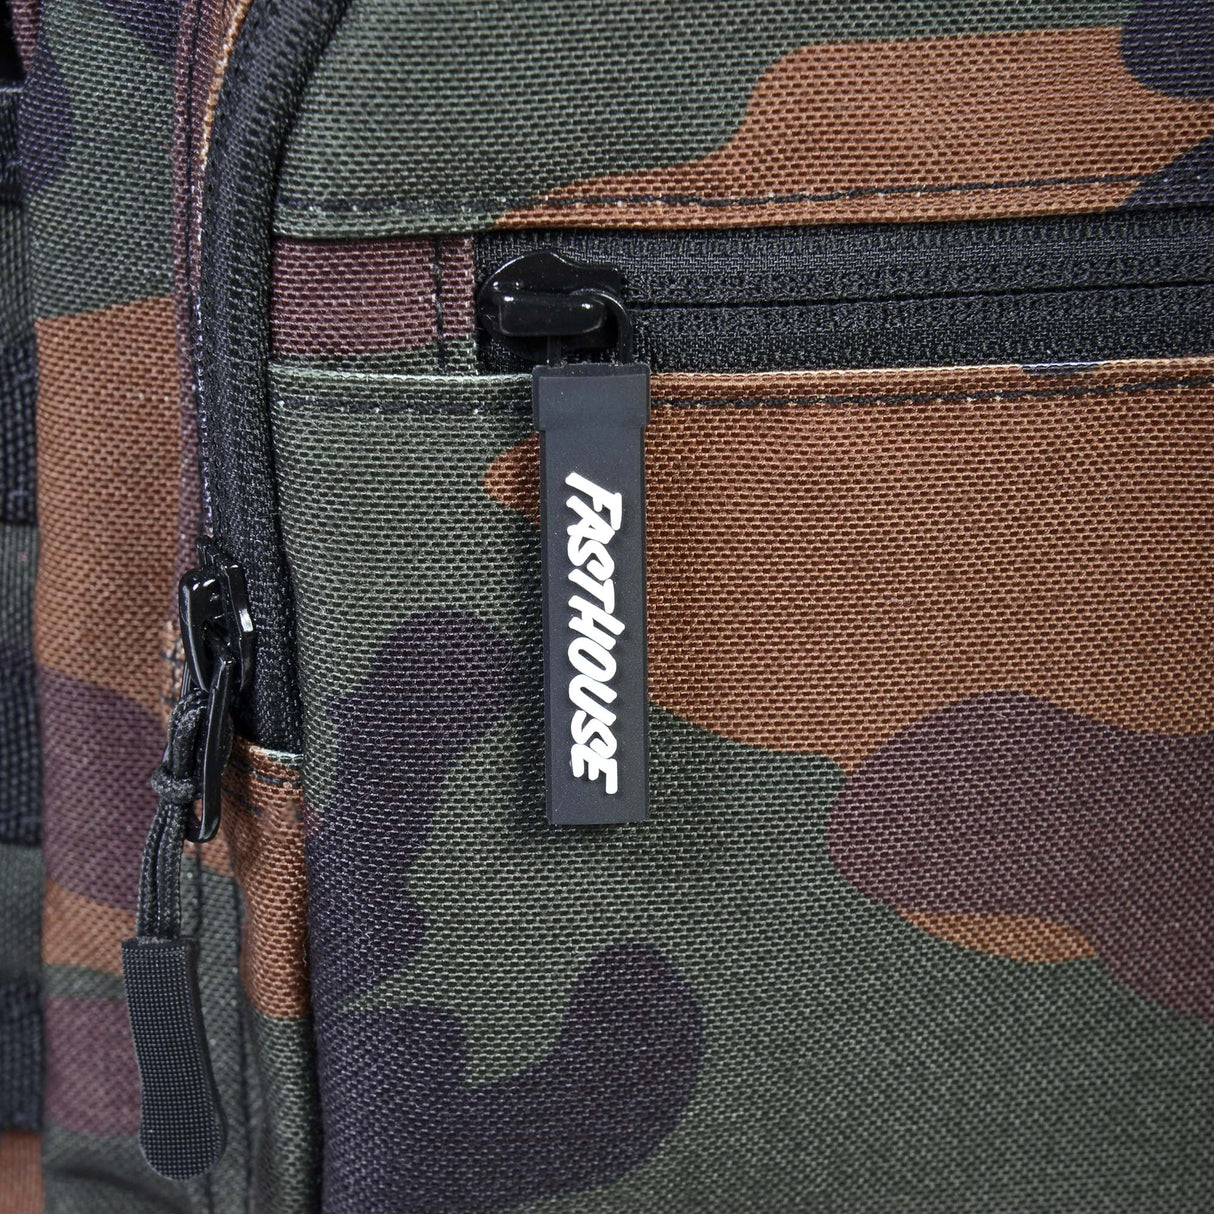 Fasthouse Union Backpack